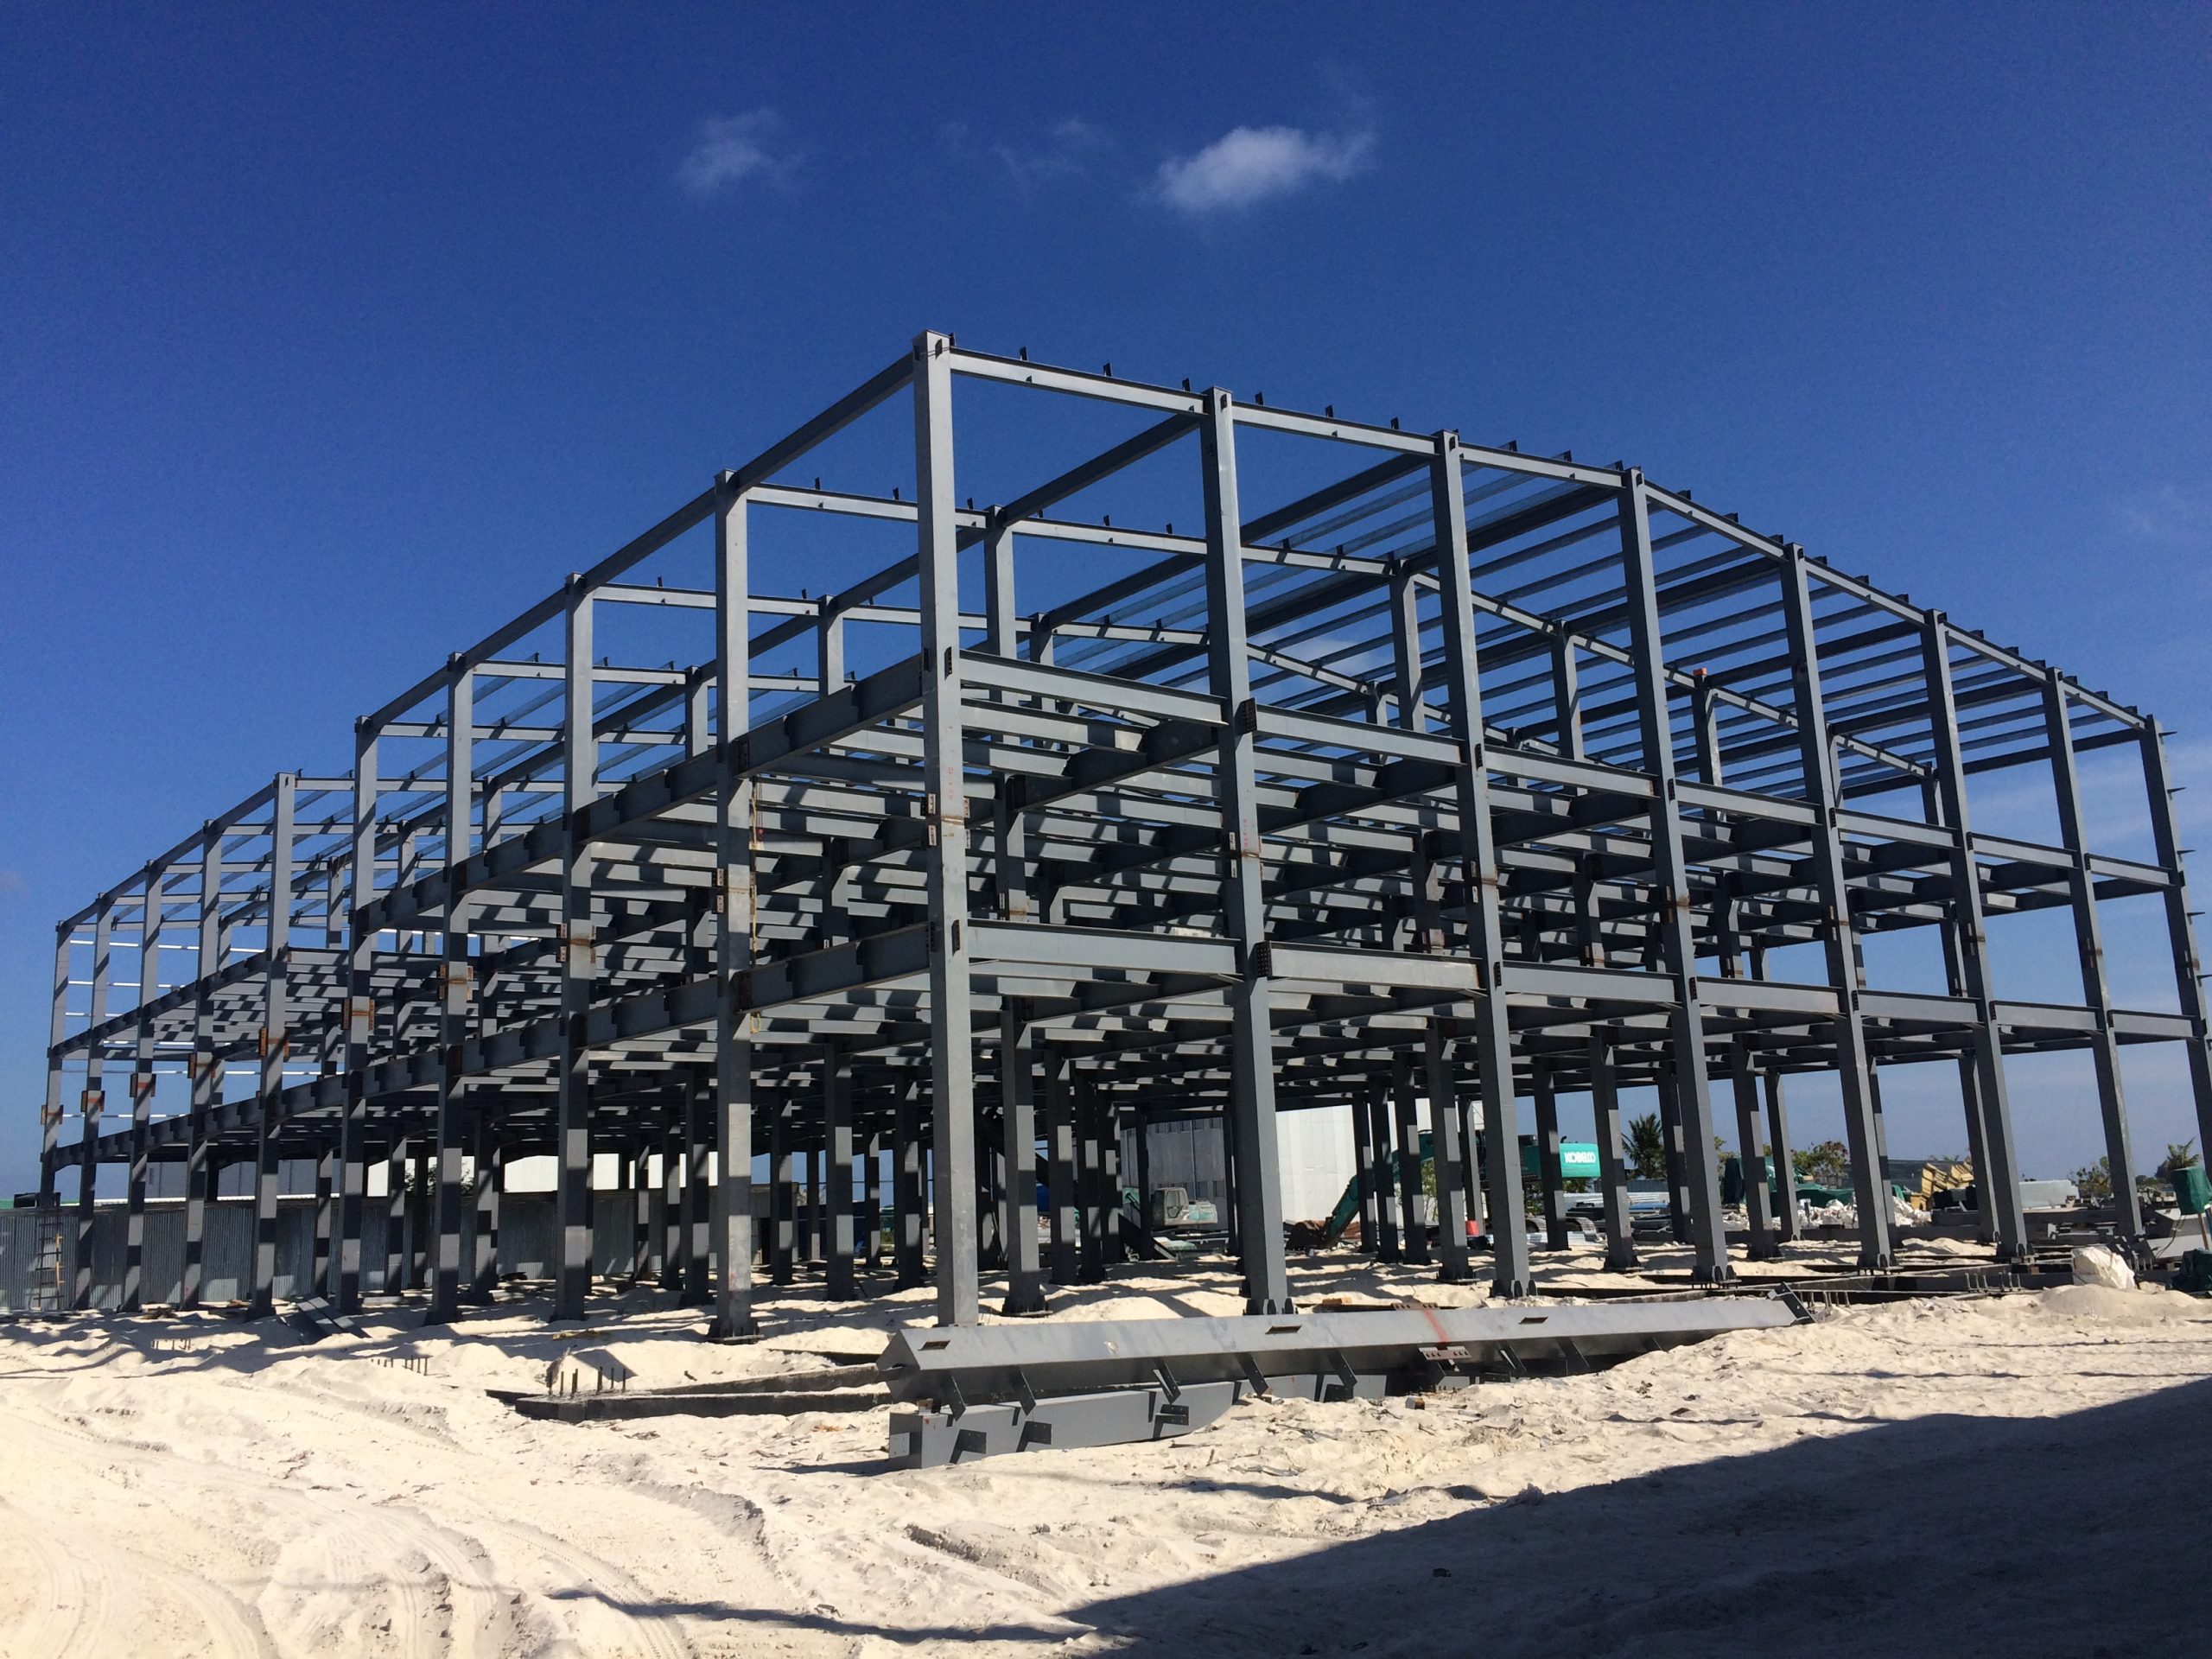 Disaster relief organizations partner with Lida Group to provide hundreds of temporary hurricane-proof steel structure shelters within weeks for those displaced by extreme weather